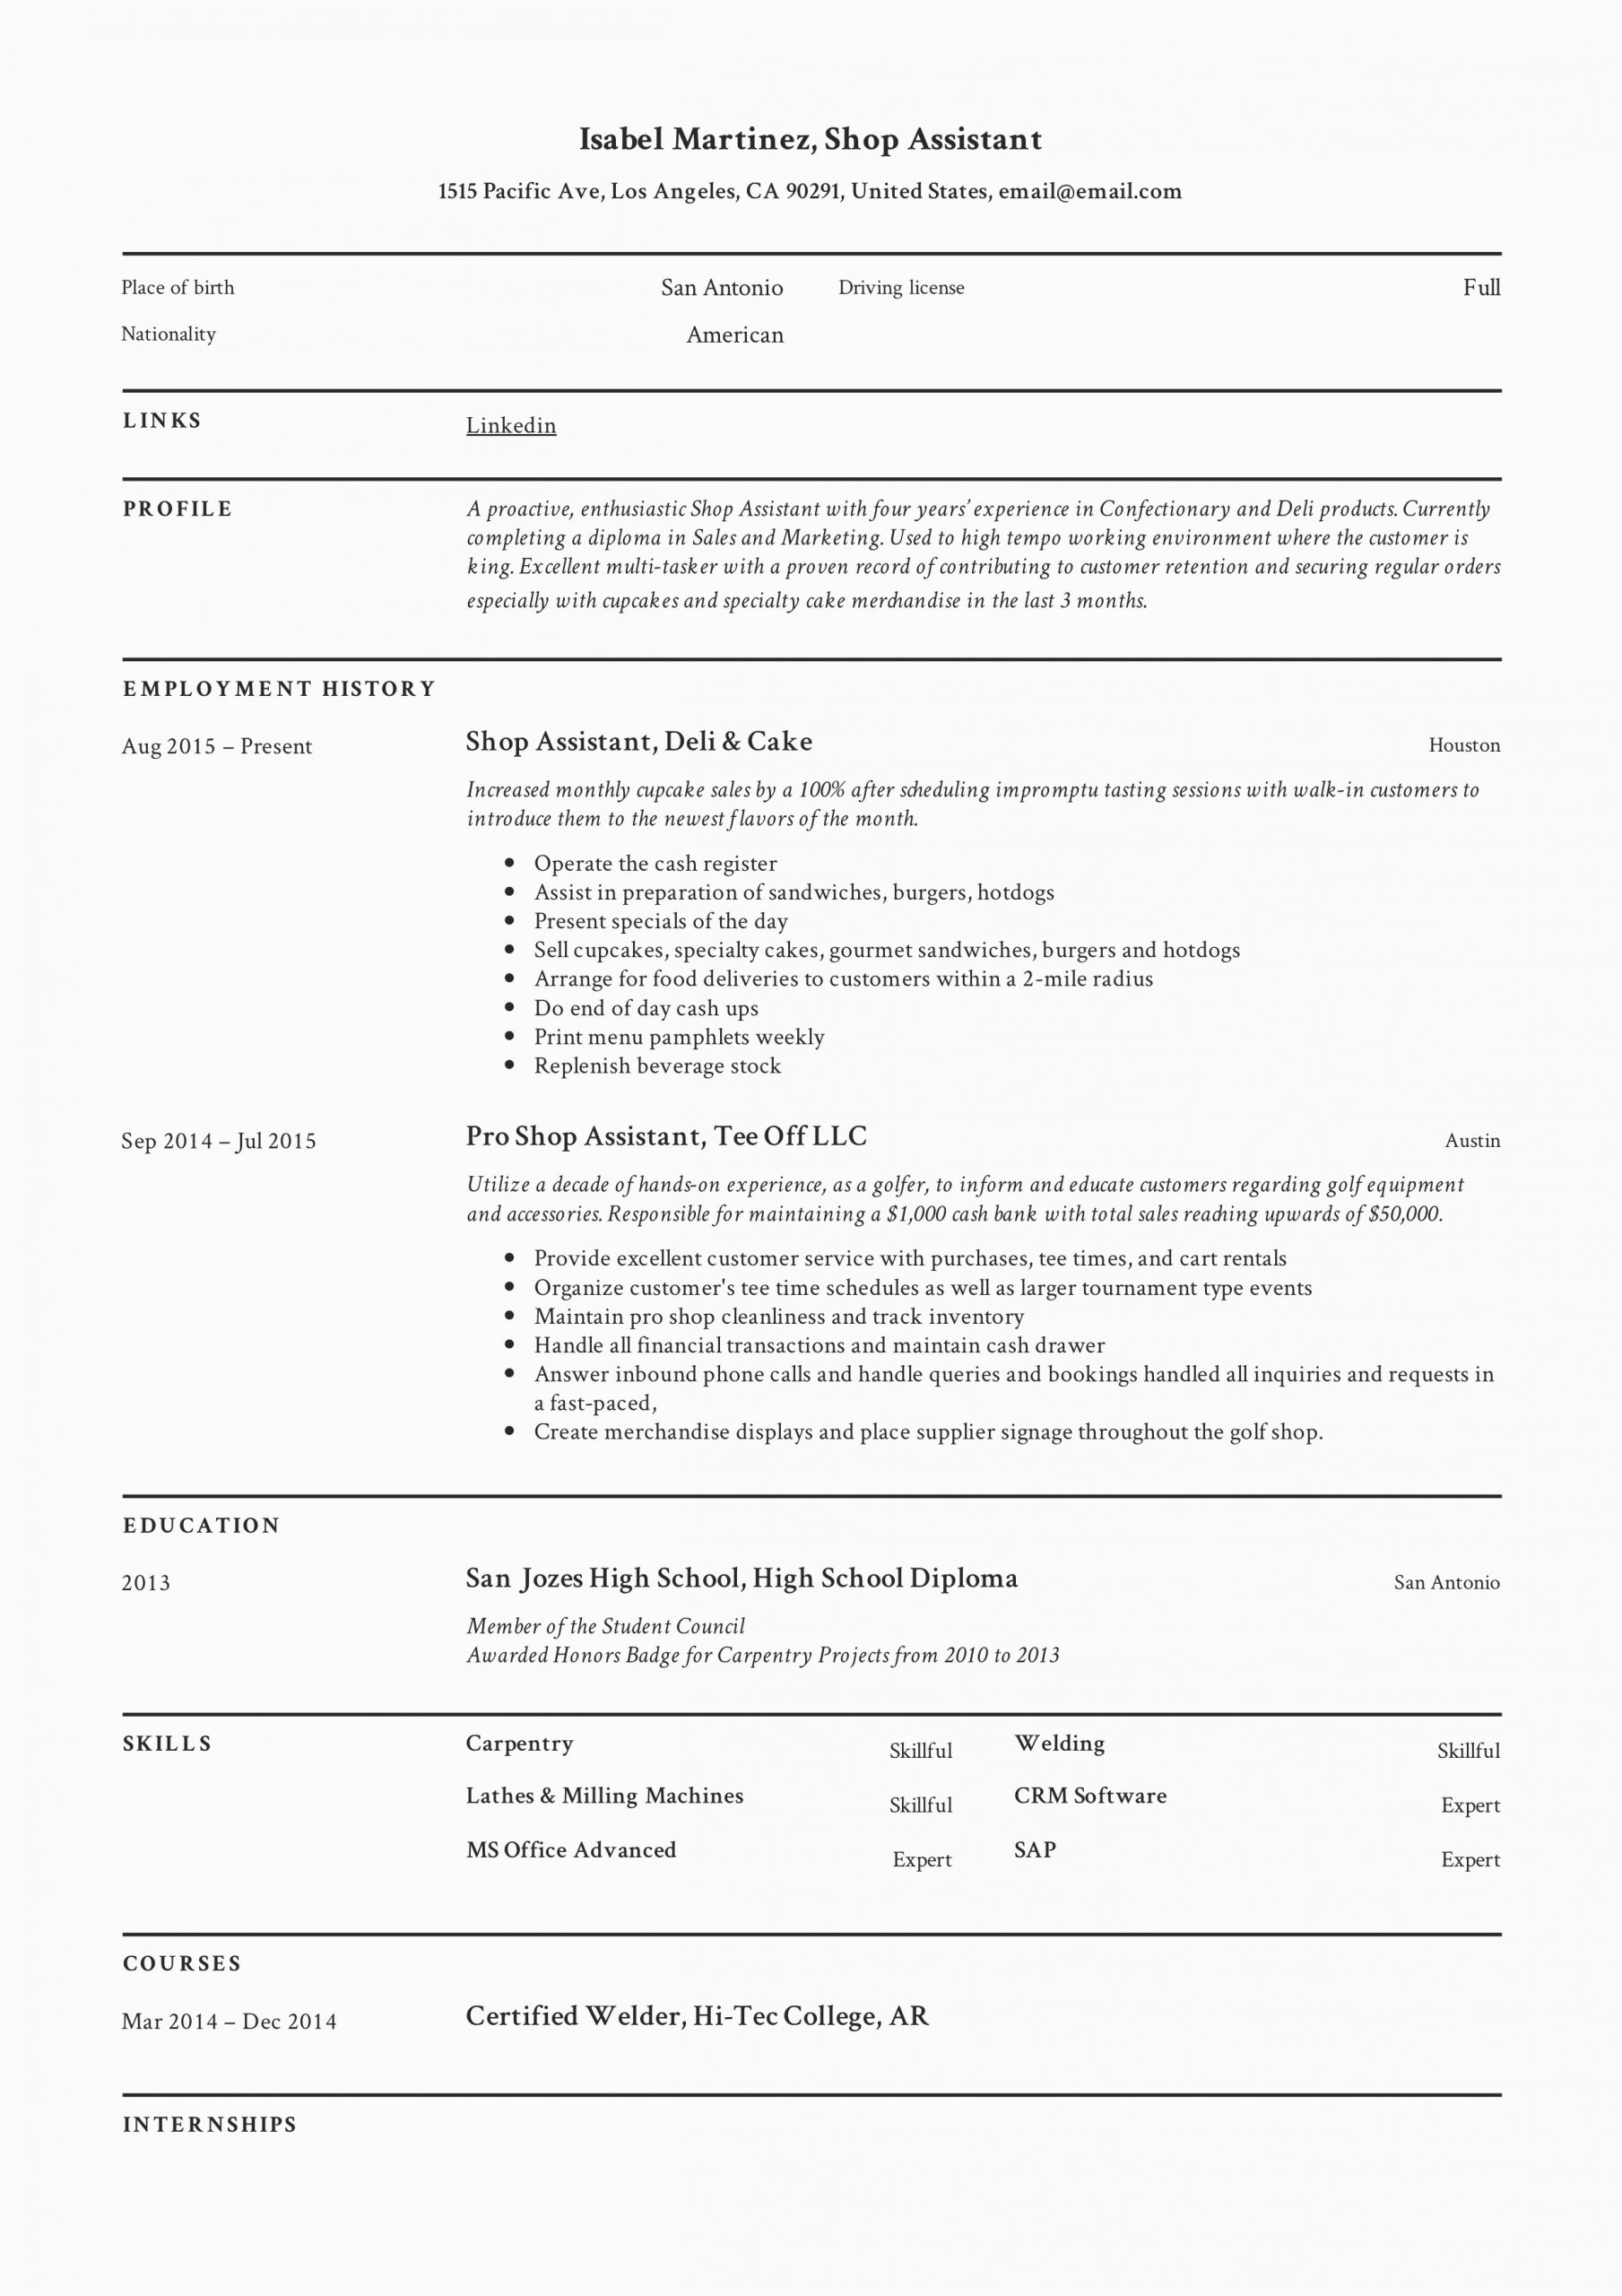 Sample Resume for Retail Shop assistant Shop assistant Resume Example & Writing Guide